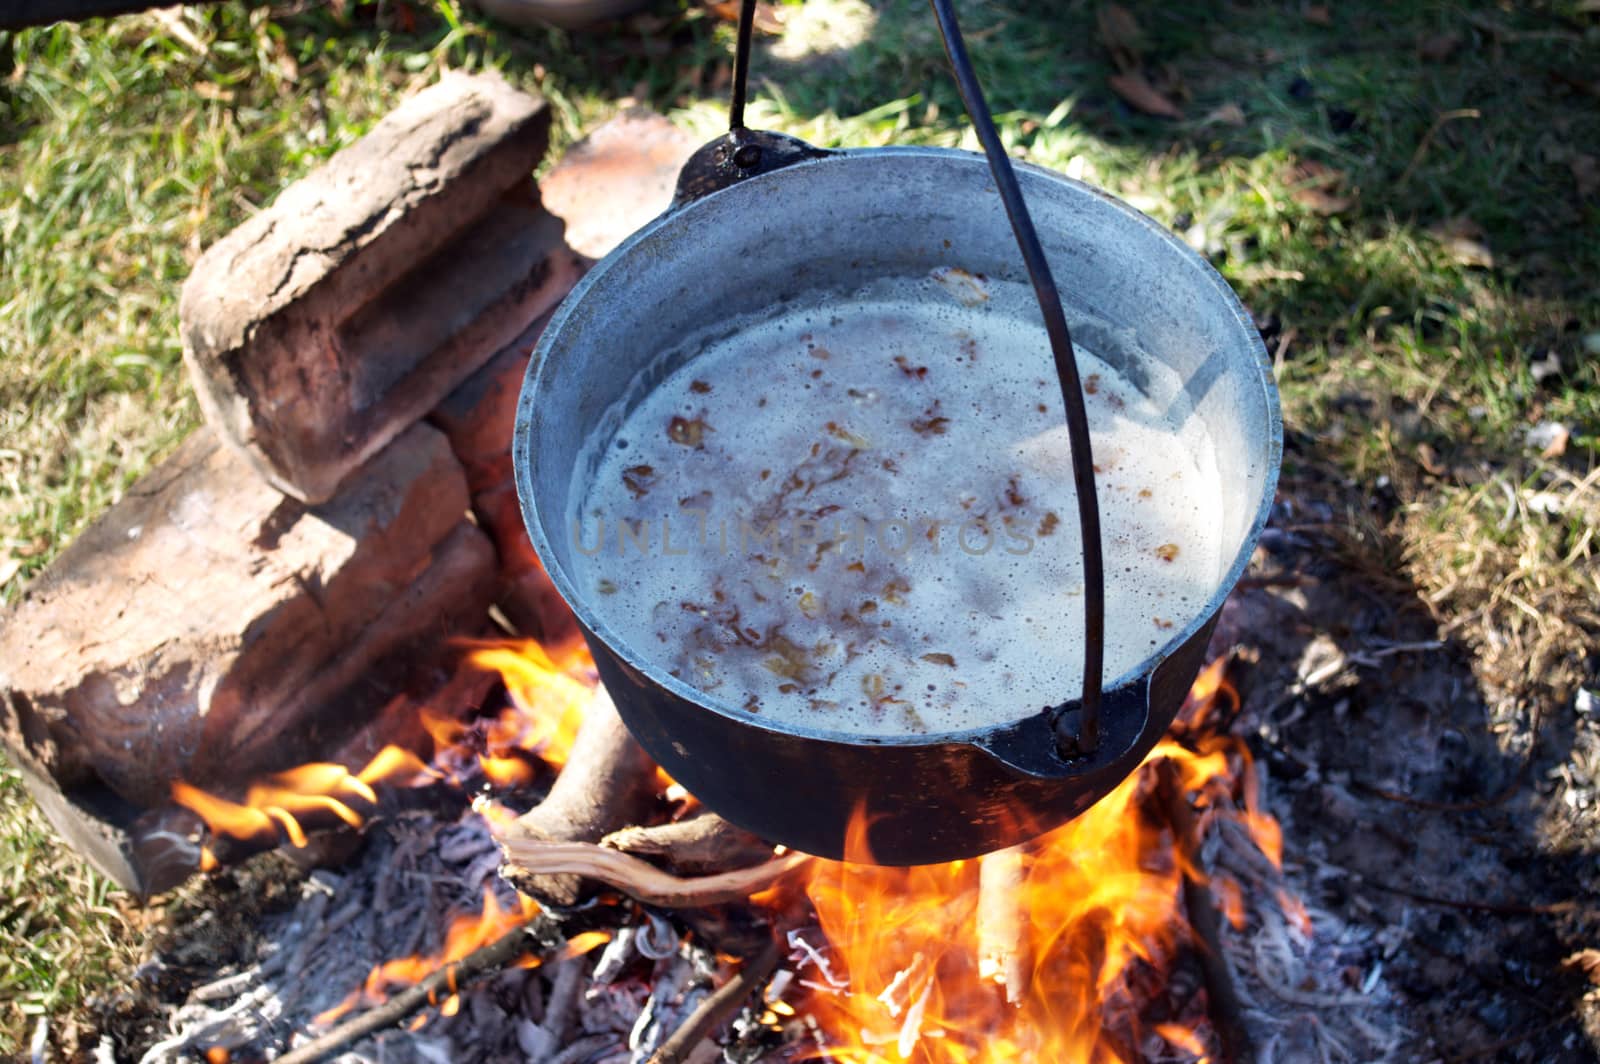 cauldron cooking food on an open fire